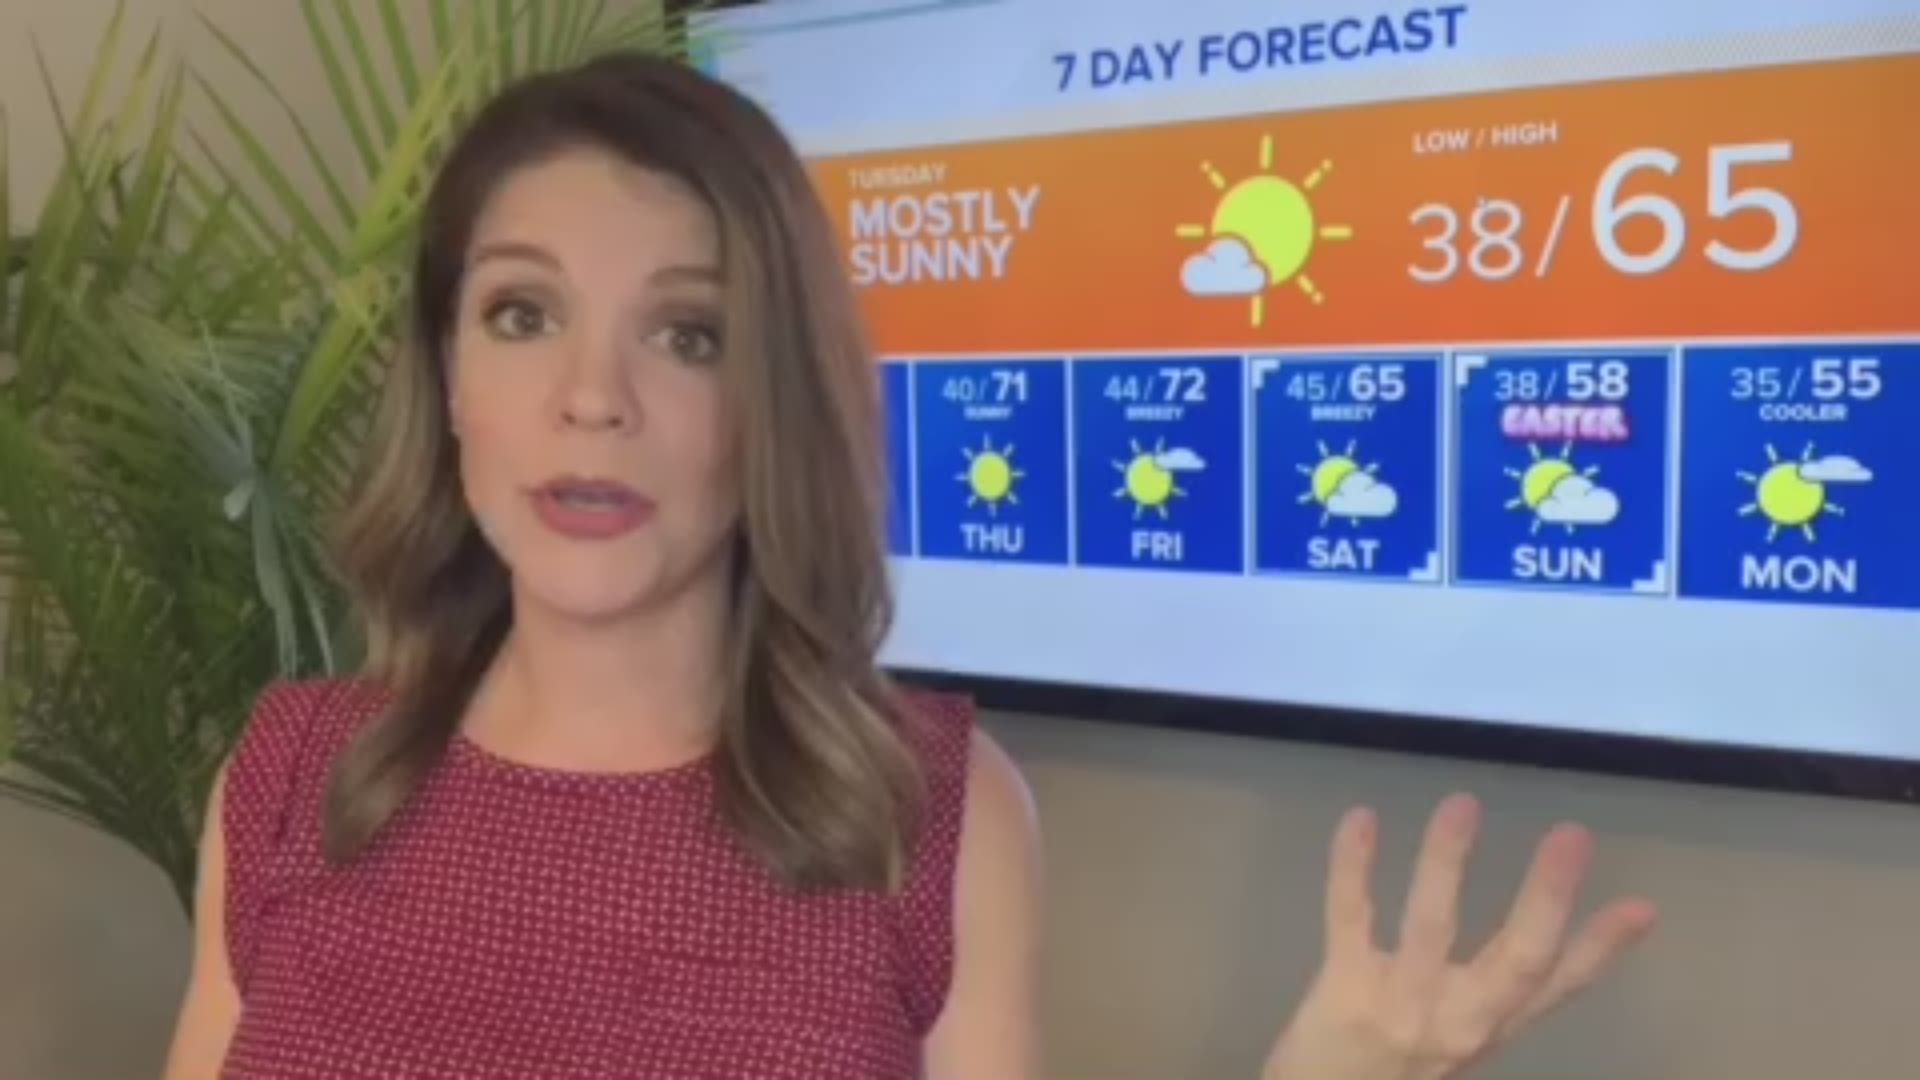 KTVB meteorologist Bri Eggers shows us around her in-home weather studio, which shares a room with her child's playroom.